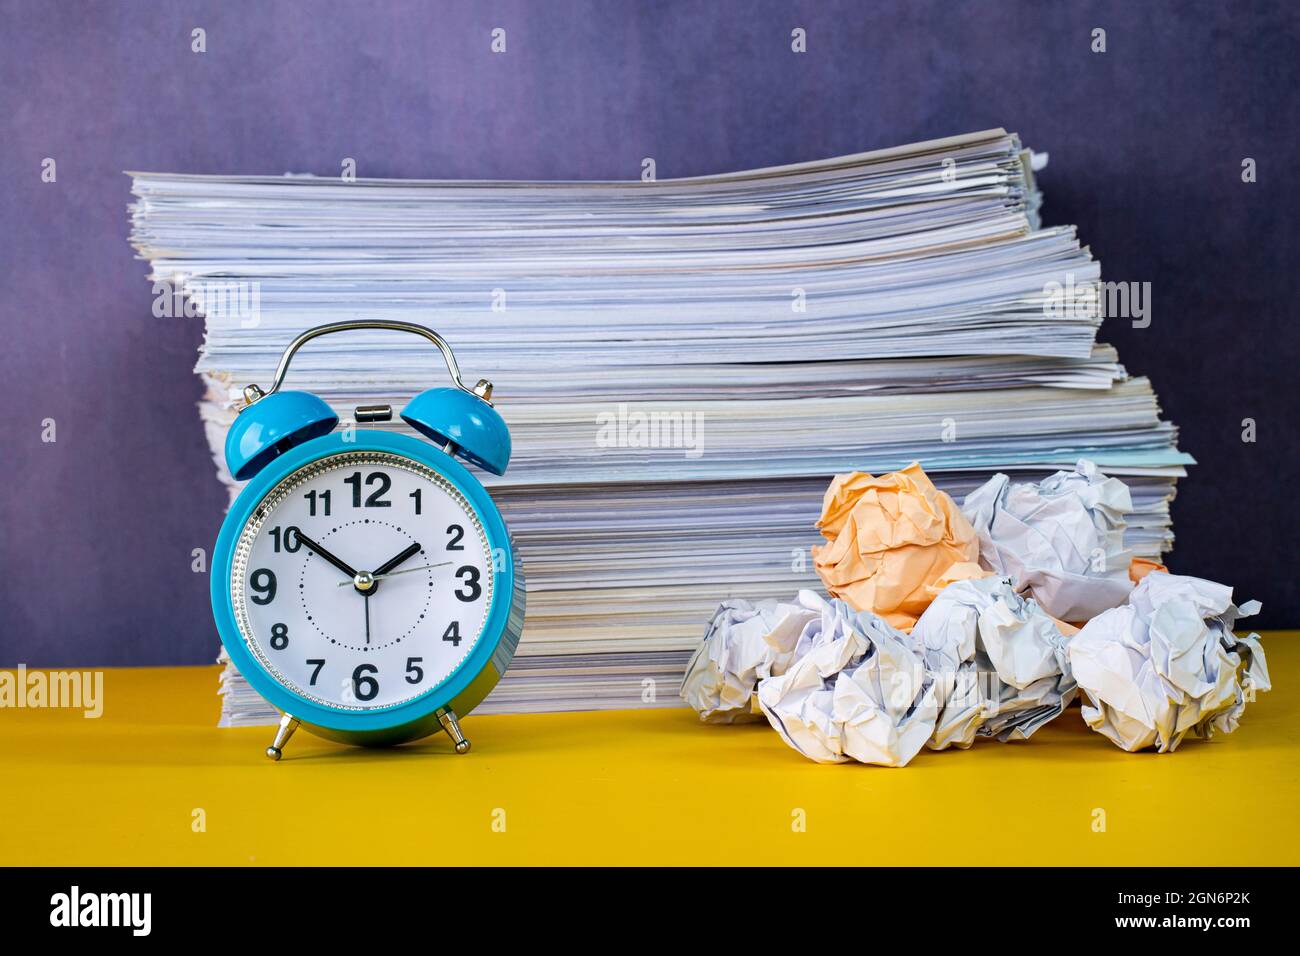 Business concept. Layout of alarm clock, stack of papers and crumpled papers depicting procrastinate Stock Photo